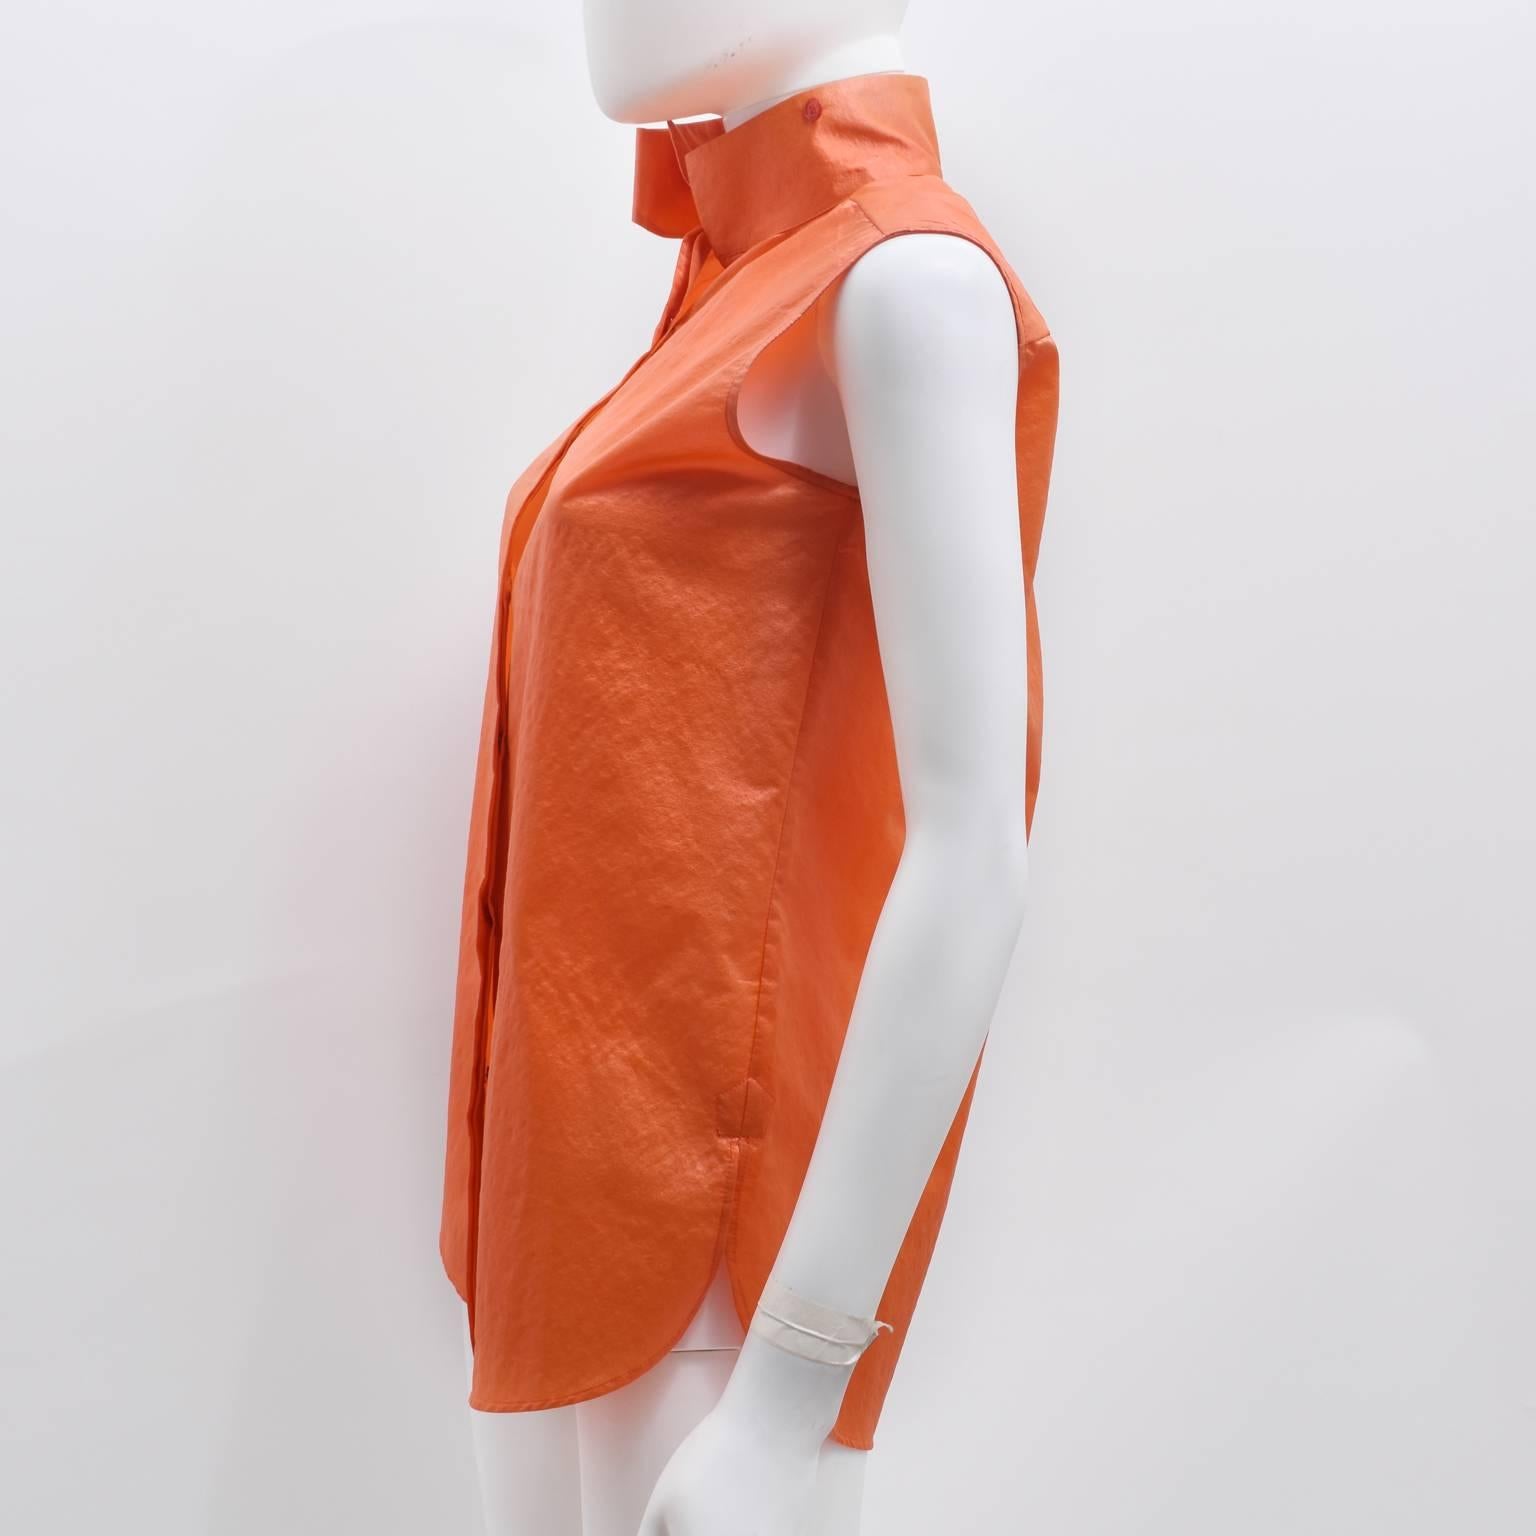 Balenciaga Orange Sleeveless Vest Shirt with Collar Details  In Excellent Condition For Sale In London, GB